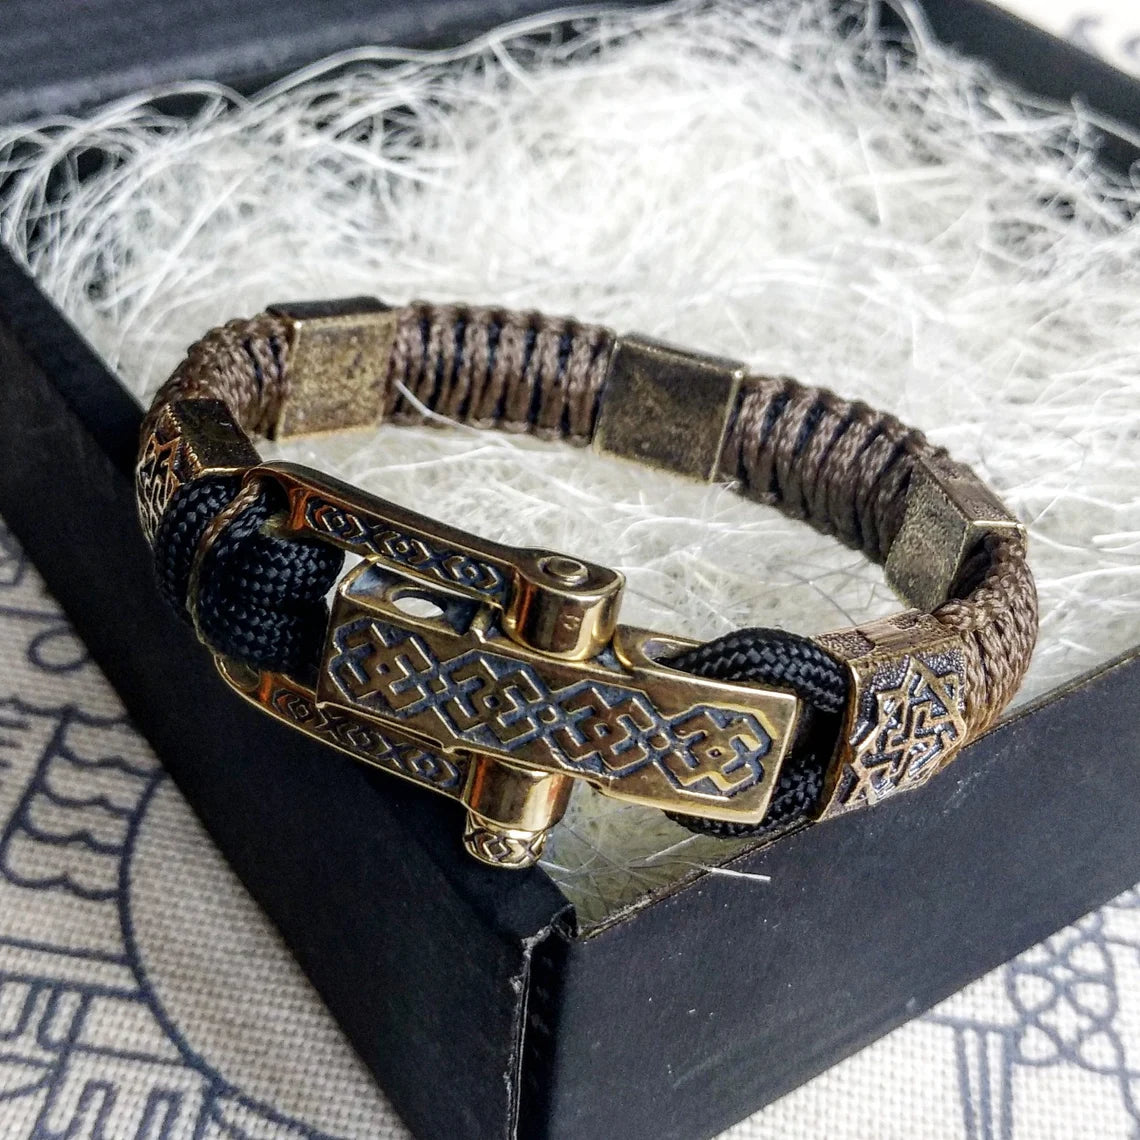 Celtic paracord bracelet with the symbol "Valkyrie".  Great gift for husband, boyfriend, man.  Viking style.